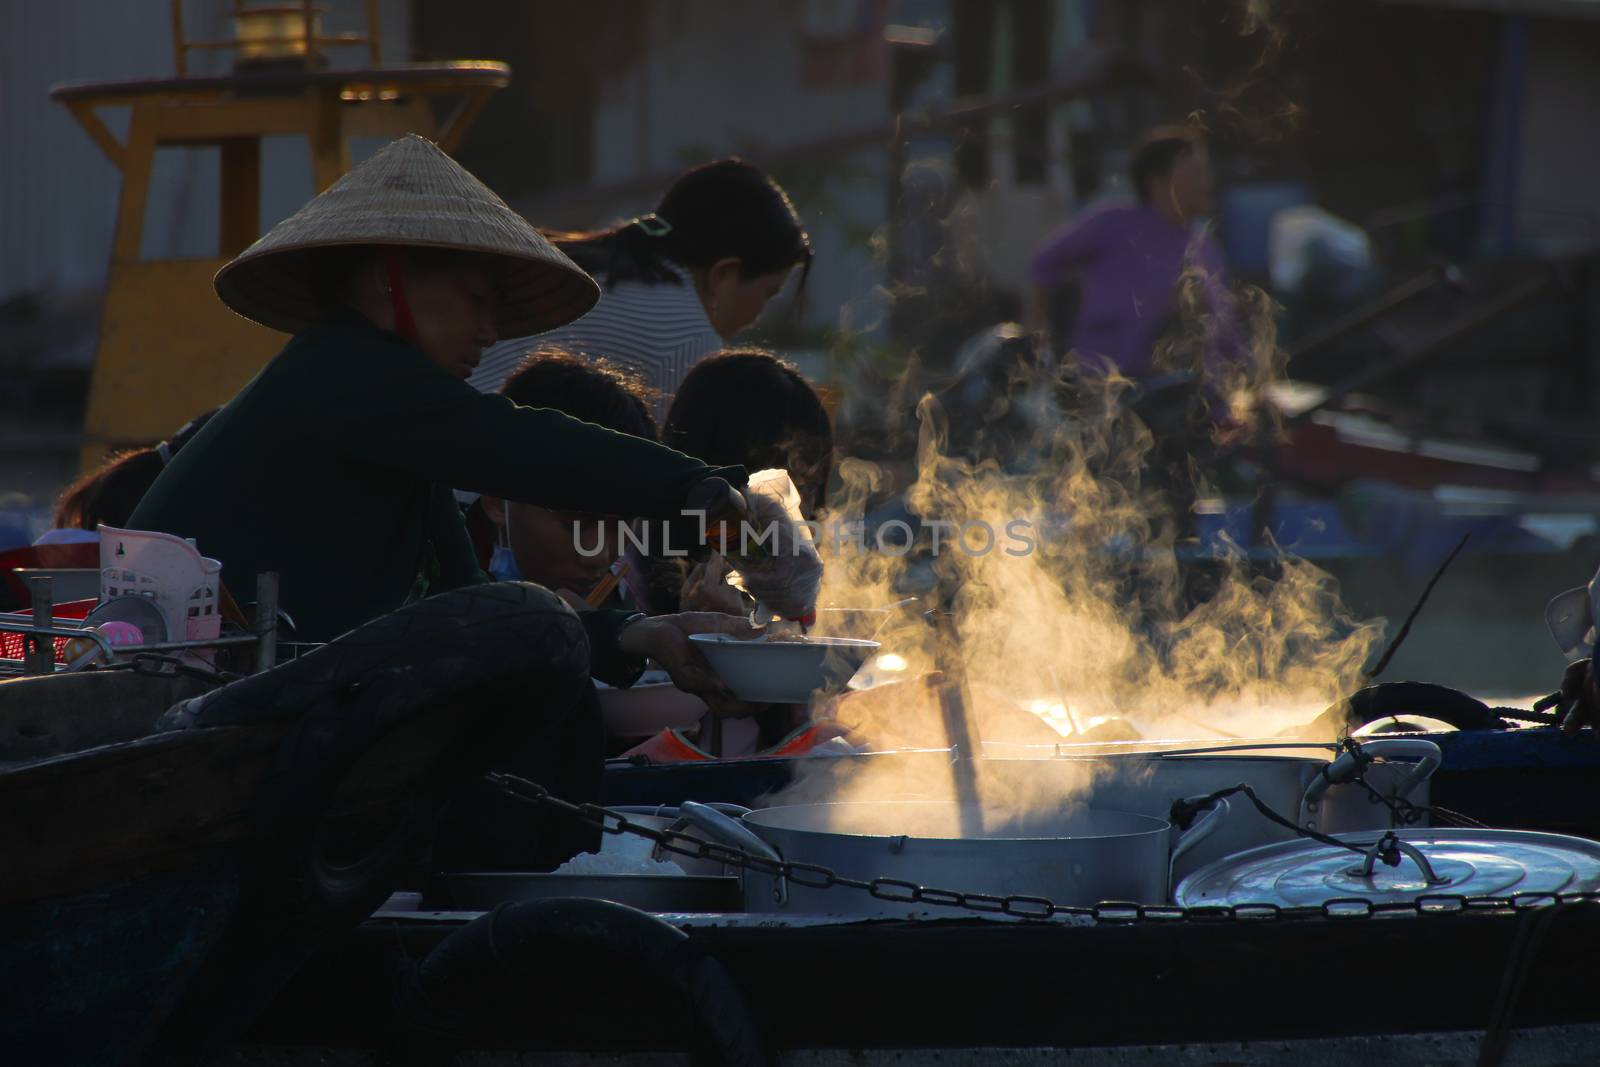 Editorial. Food vendors selling Vietnamese noodle soups in small wooden boats in the famous traditional Cai Rang Floating Market in Can tho, Vietnam